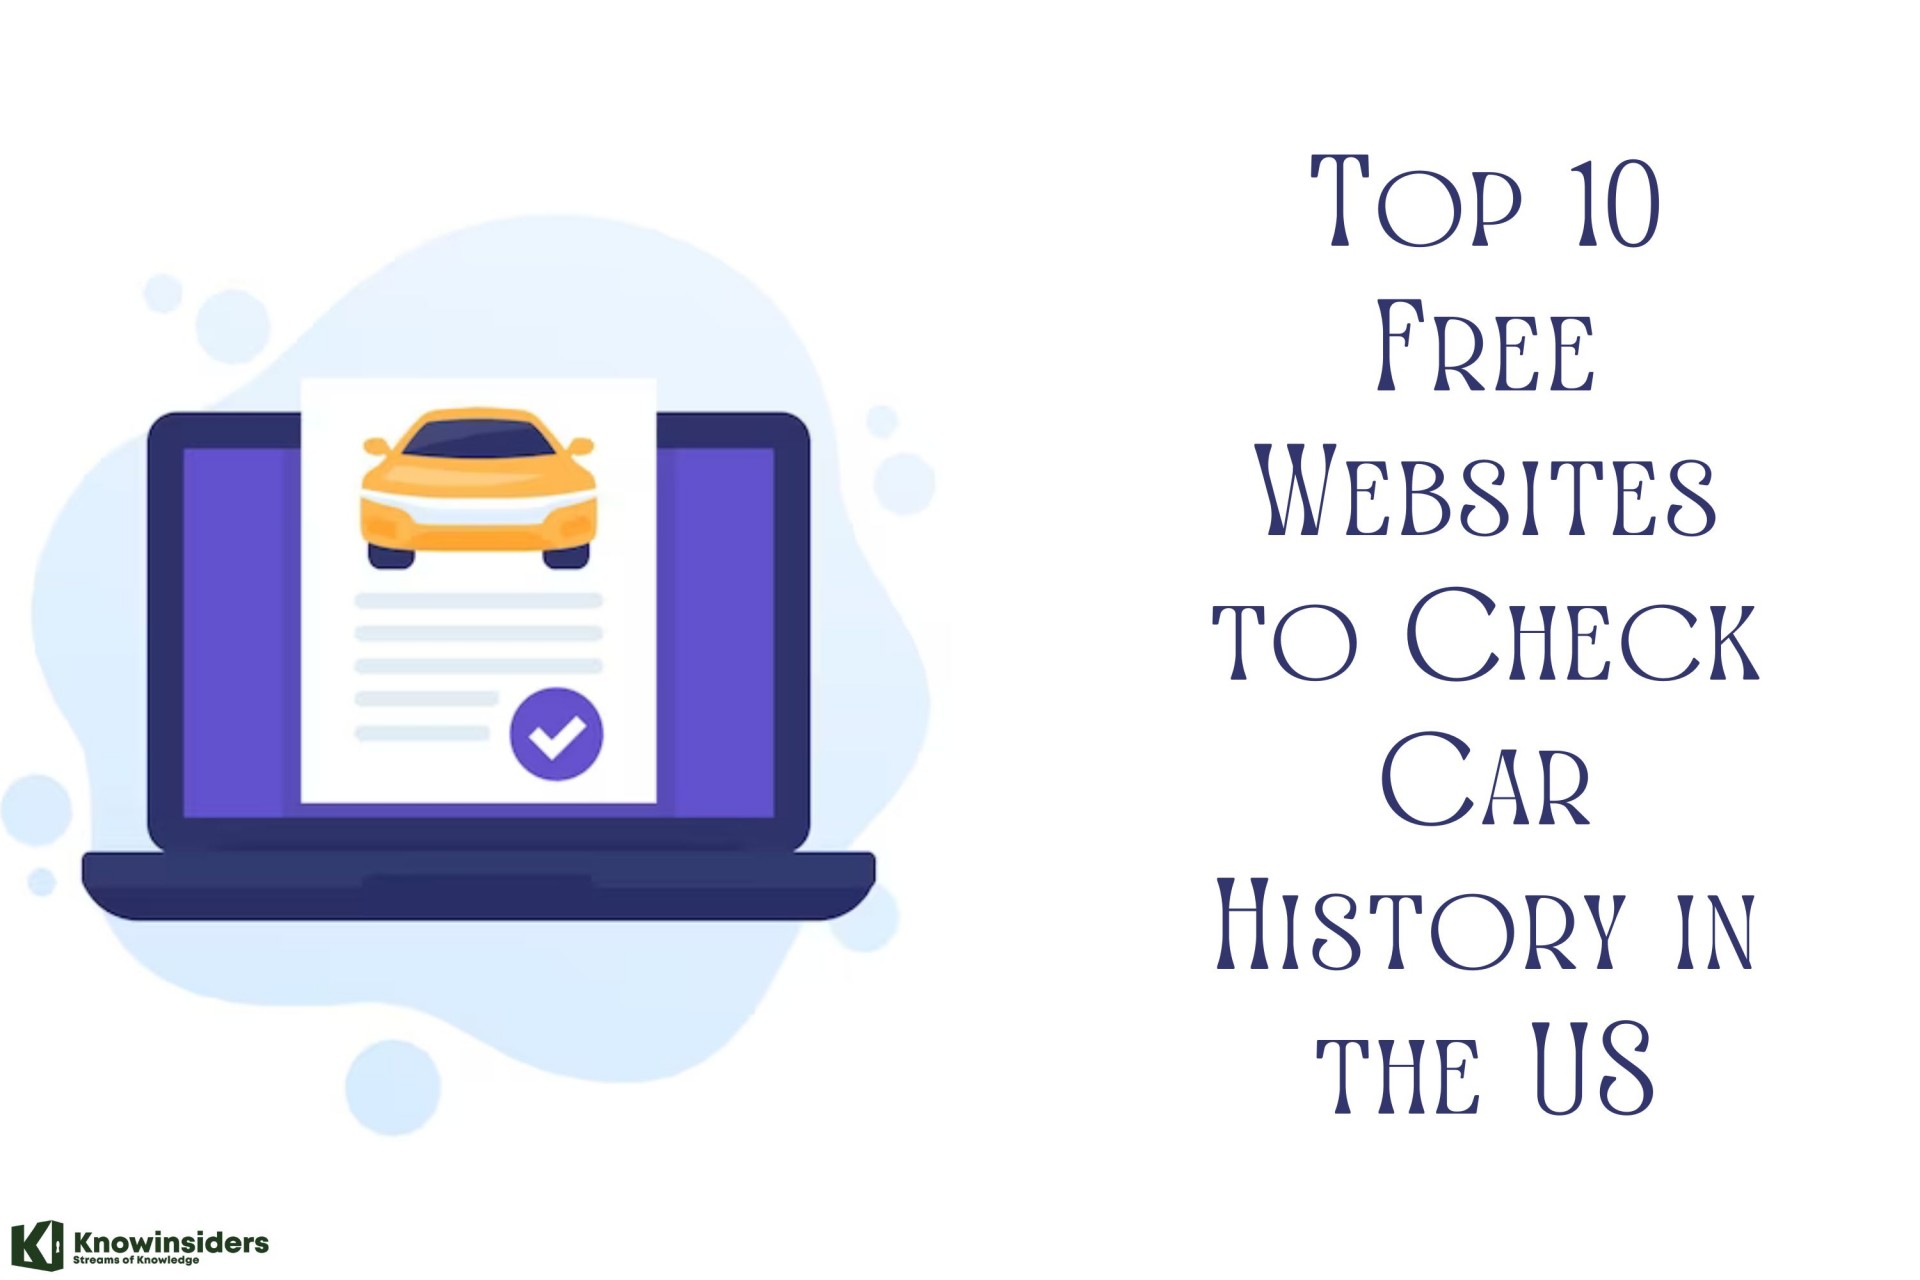 How to Check A Car History in the US - 10 Best Free Websites to Find the VIN